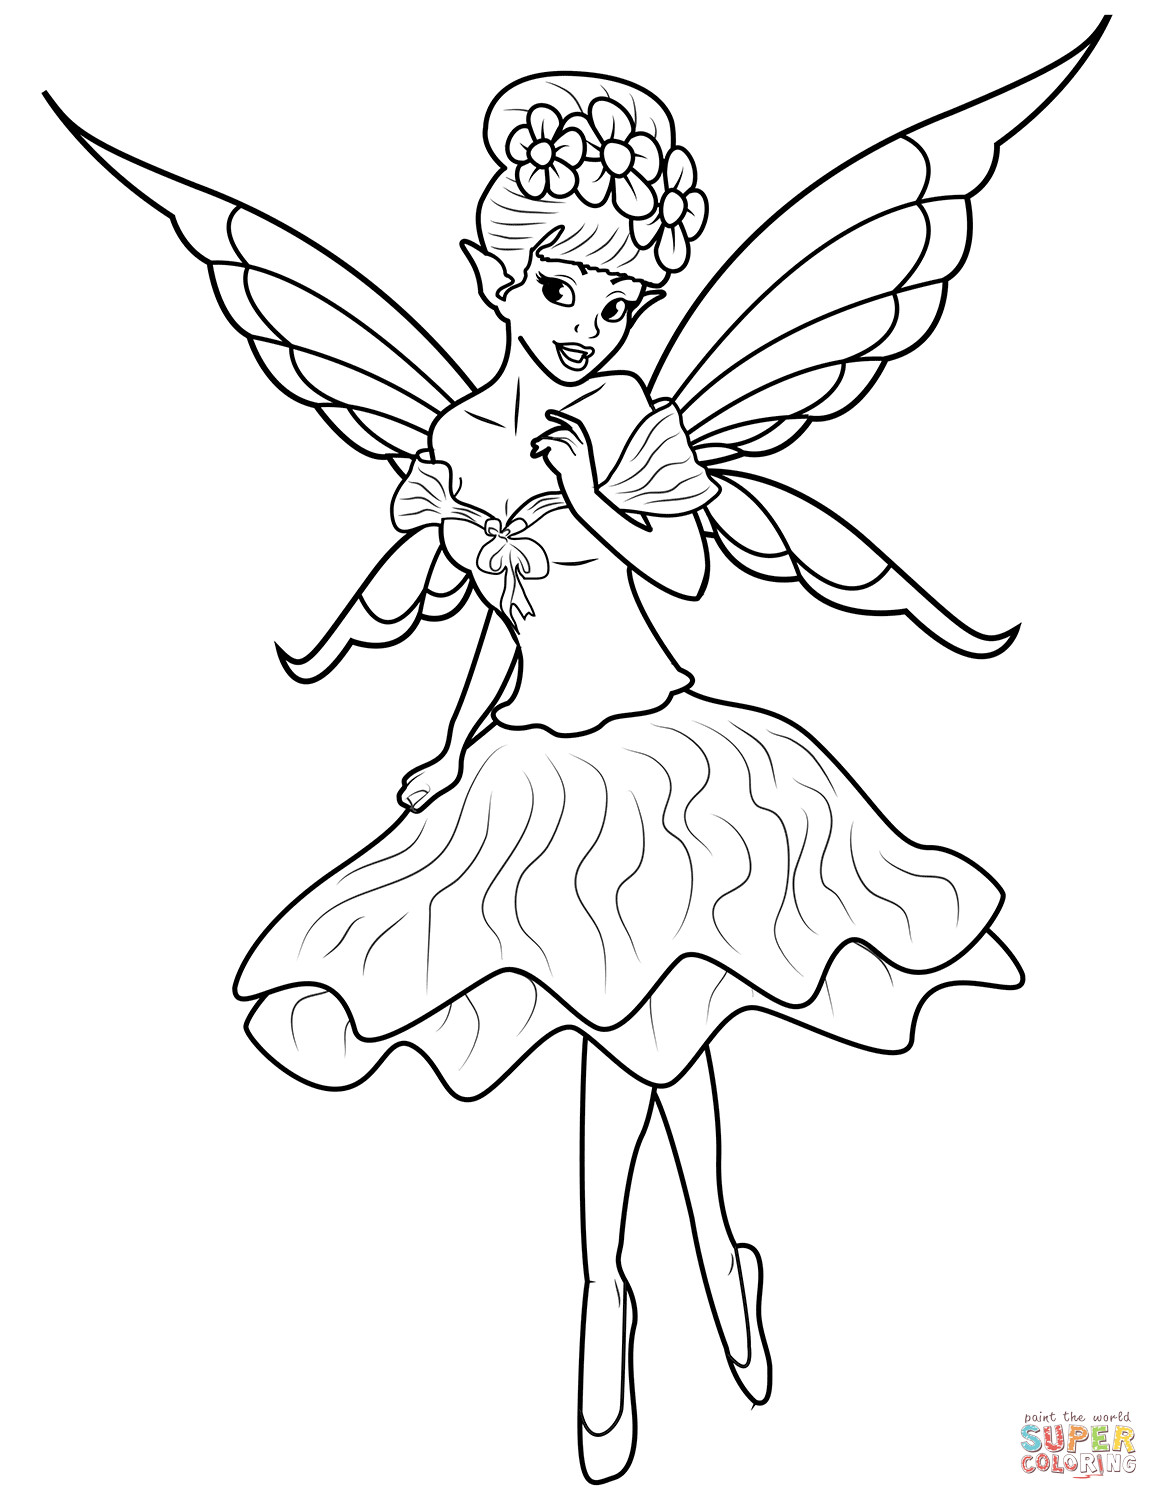 Fairy Coloring Pages For Girls At GetColorings Free Printable Colorings Pages To Print And